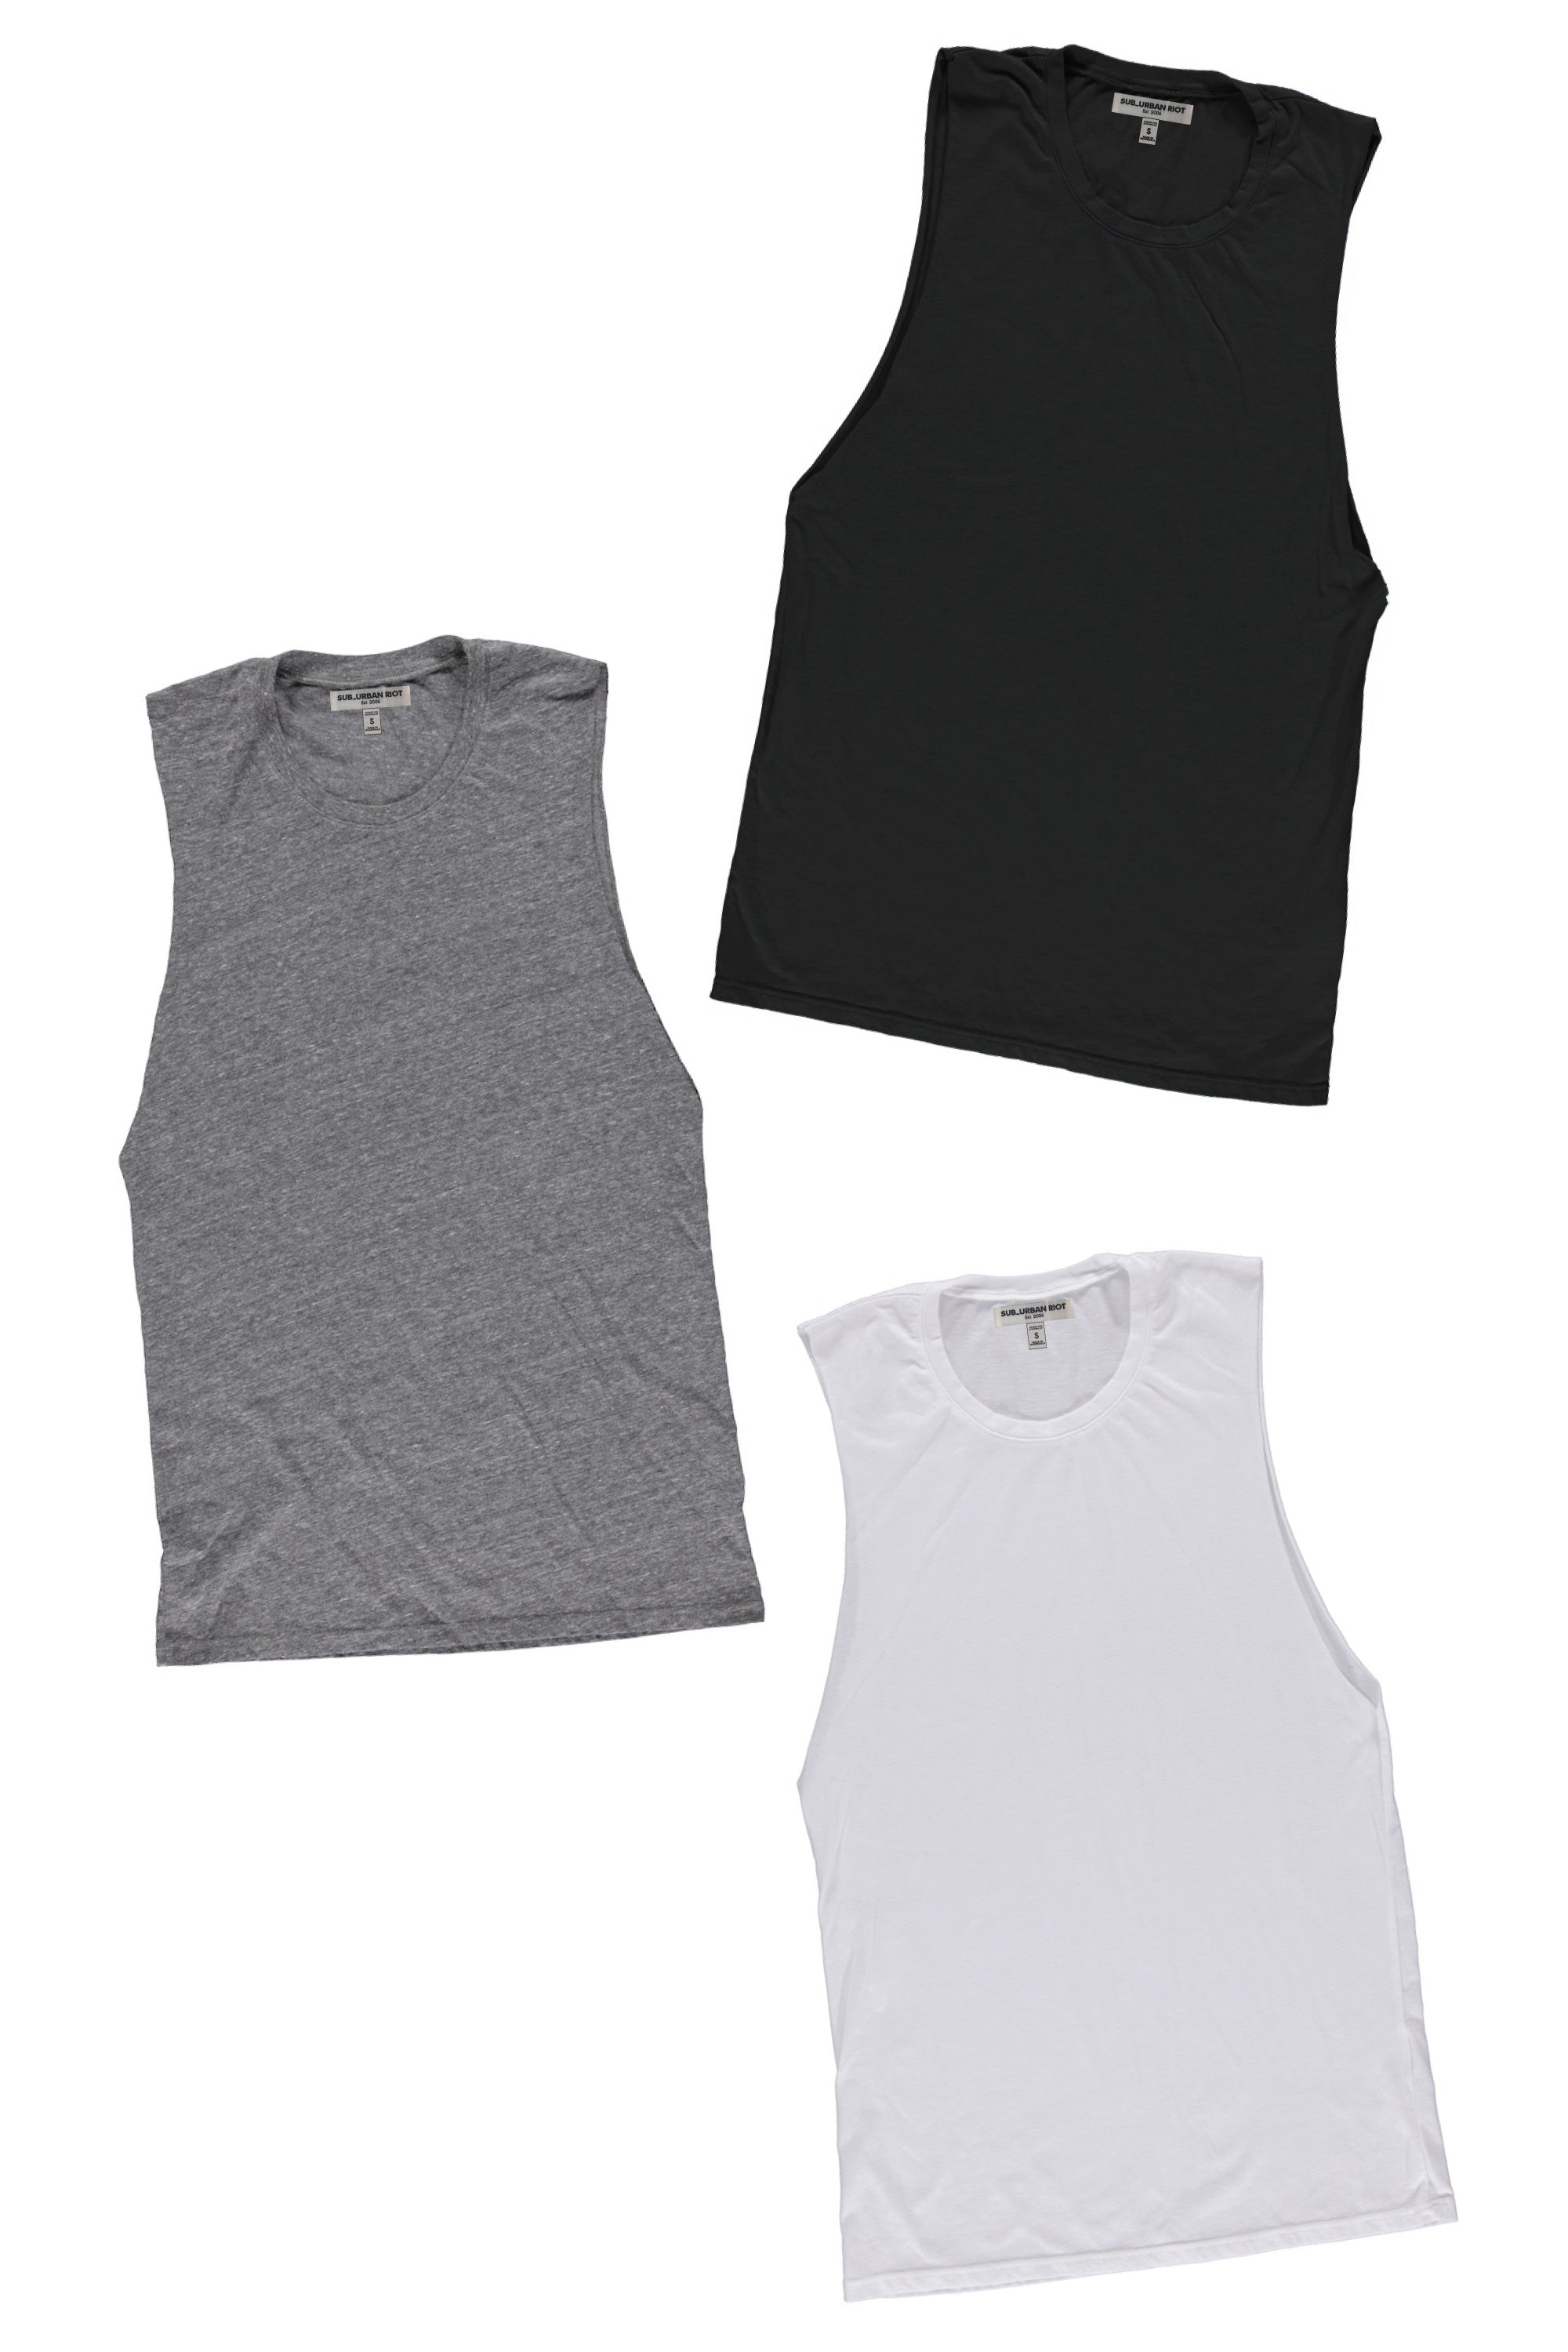 THE MUSCLE TANK - 3 PACK